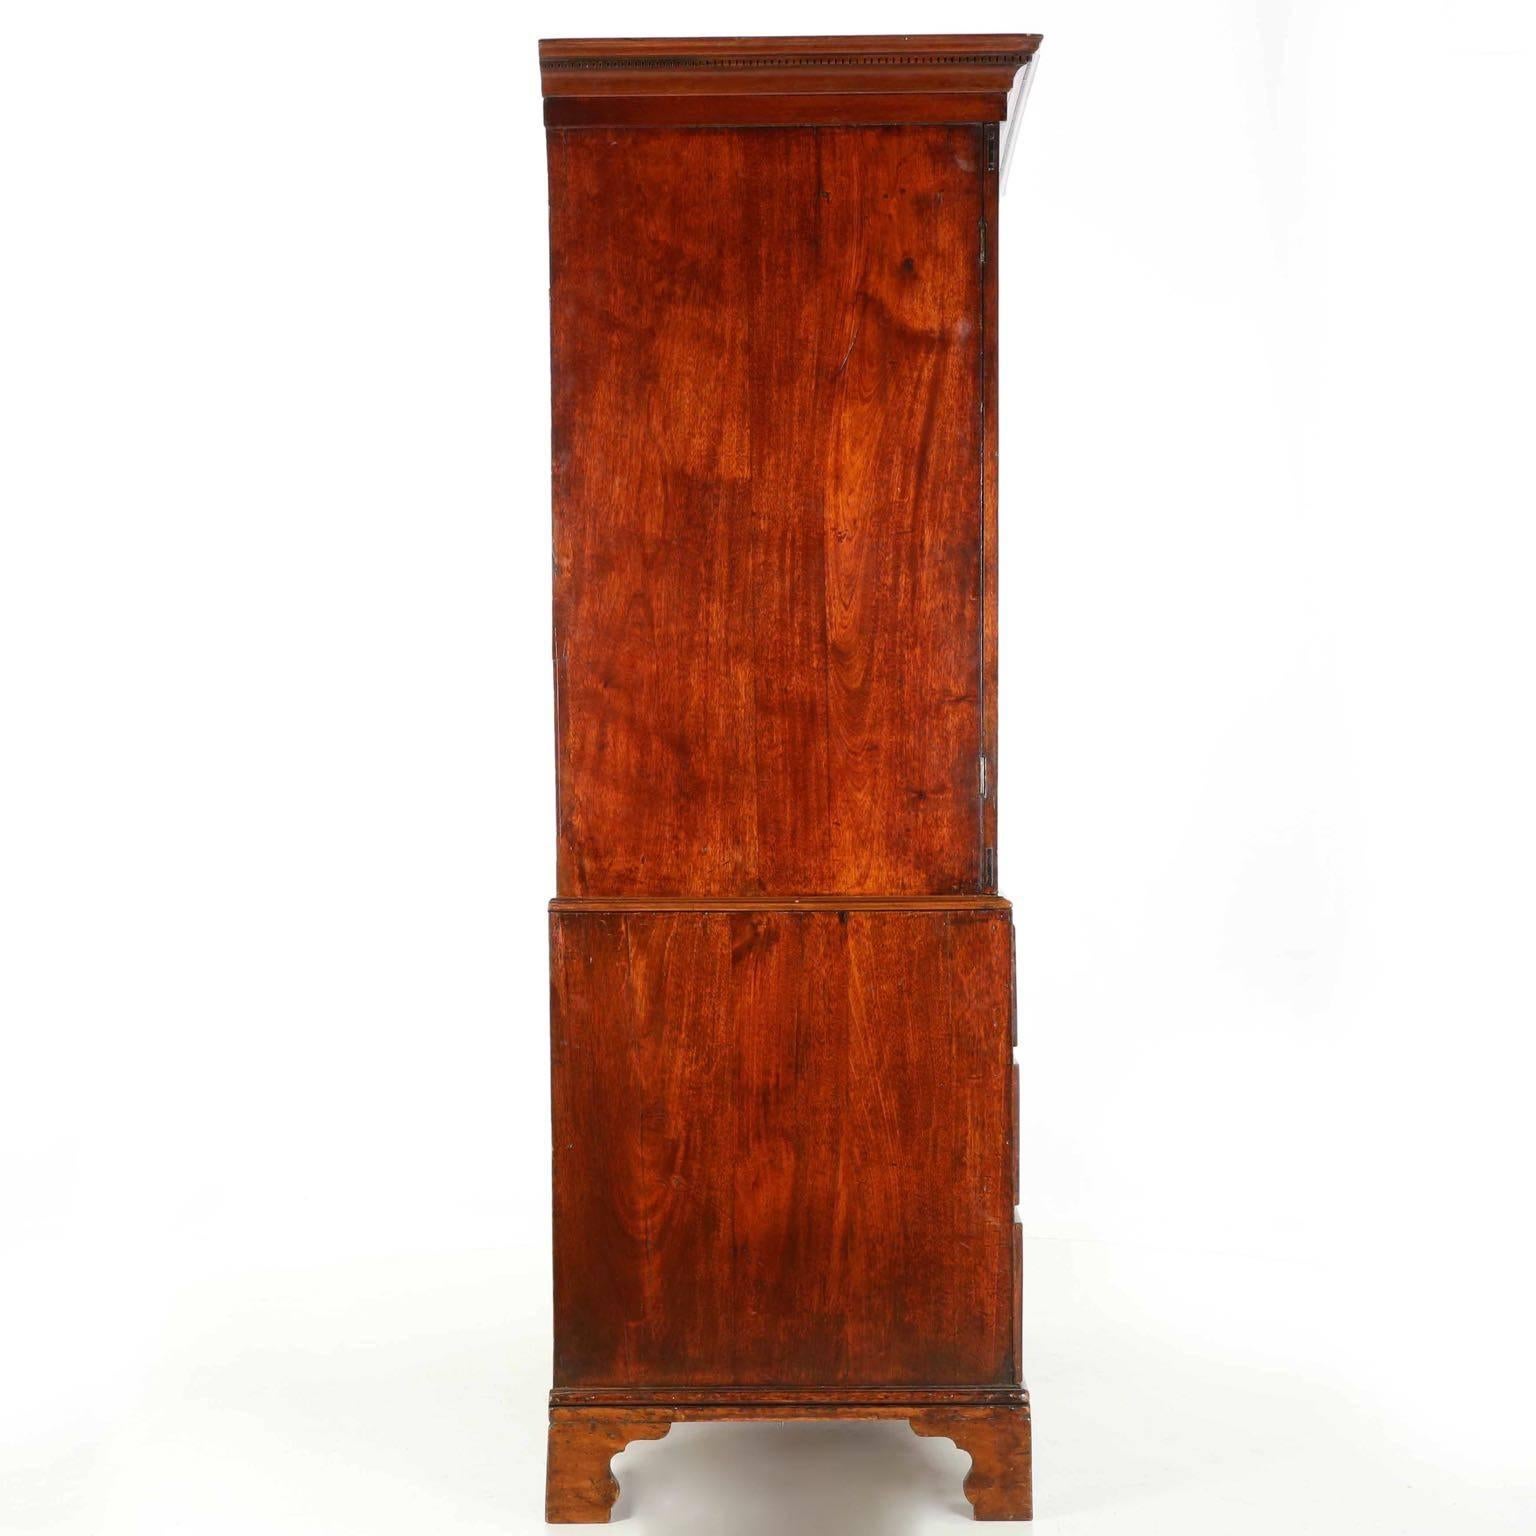 English George III mahogany linen press,
circa 1780, with gorgeous early patina.
    

A silky and beautifully developed early surface patina allows the dense island mahogany utilized throughout the case to simply glow beneath a projecting